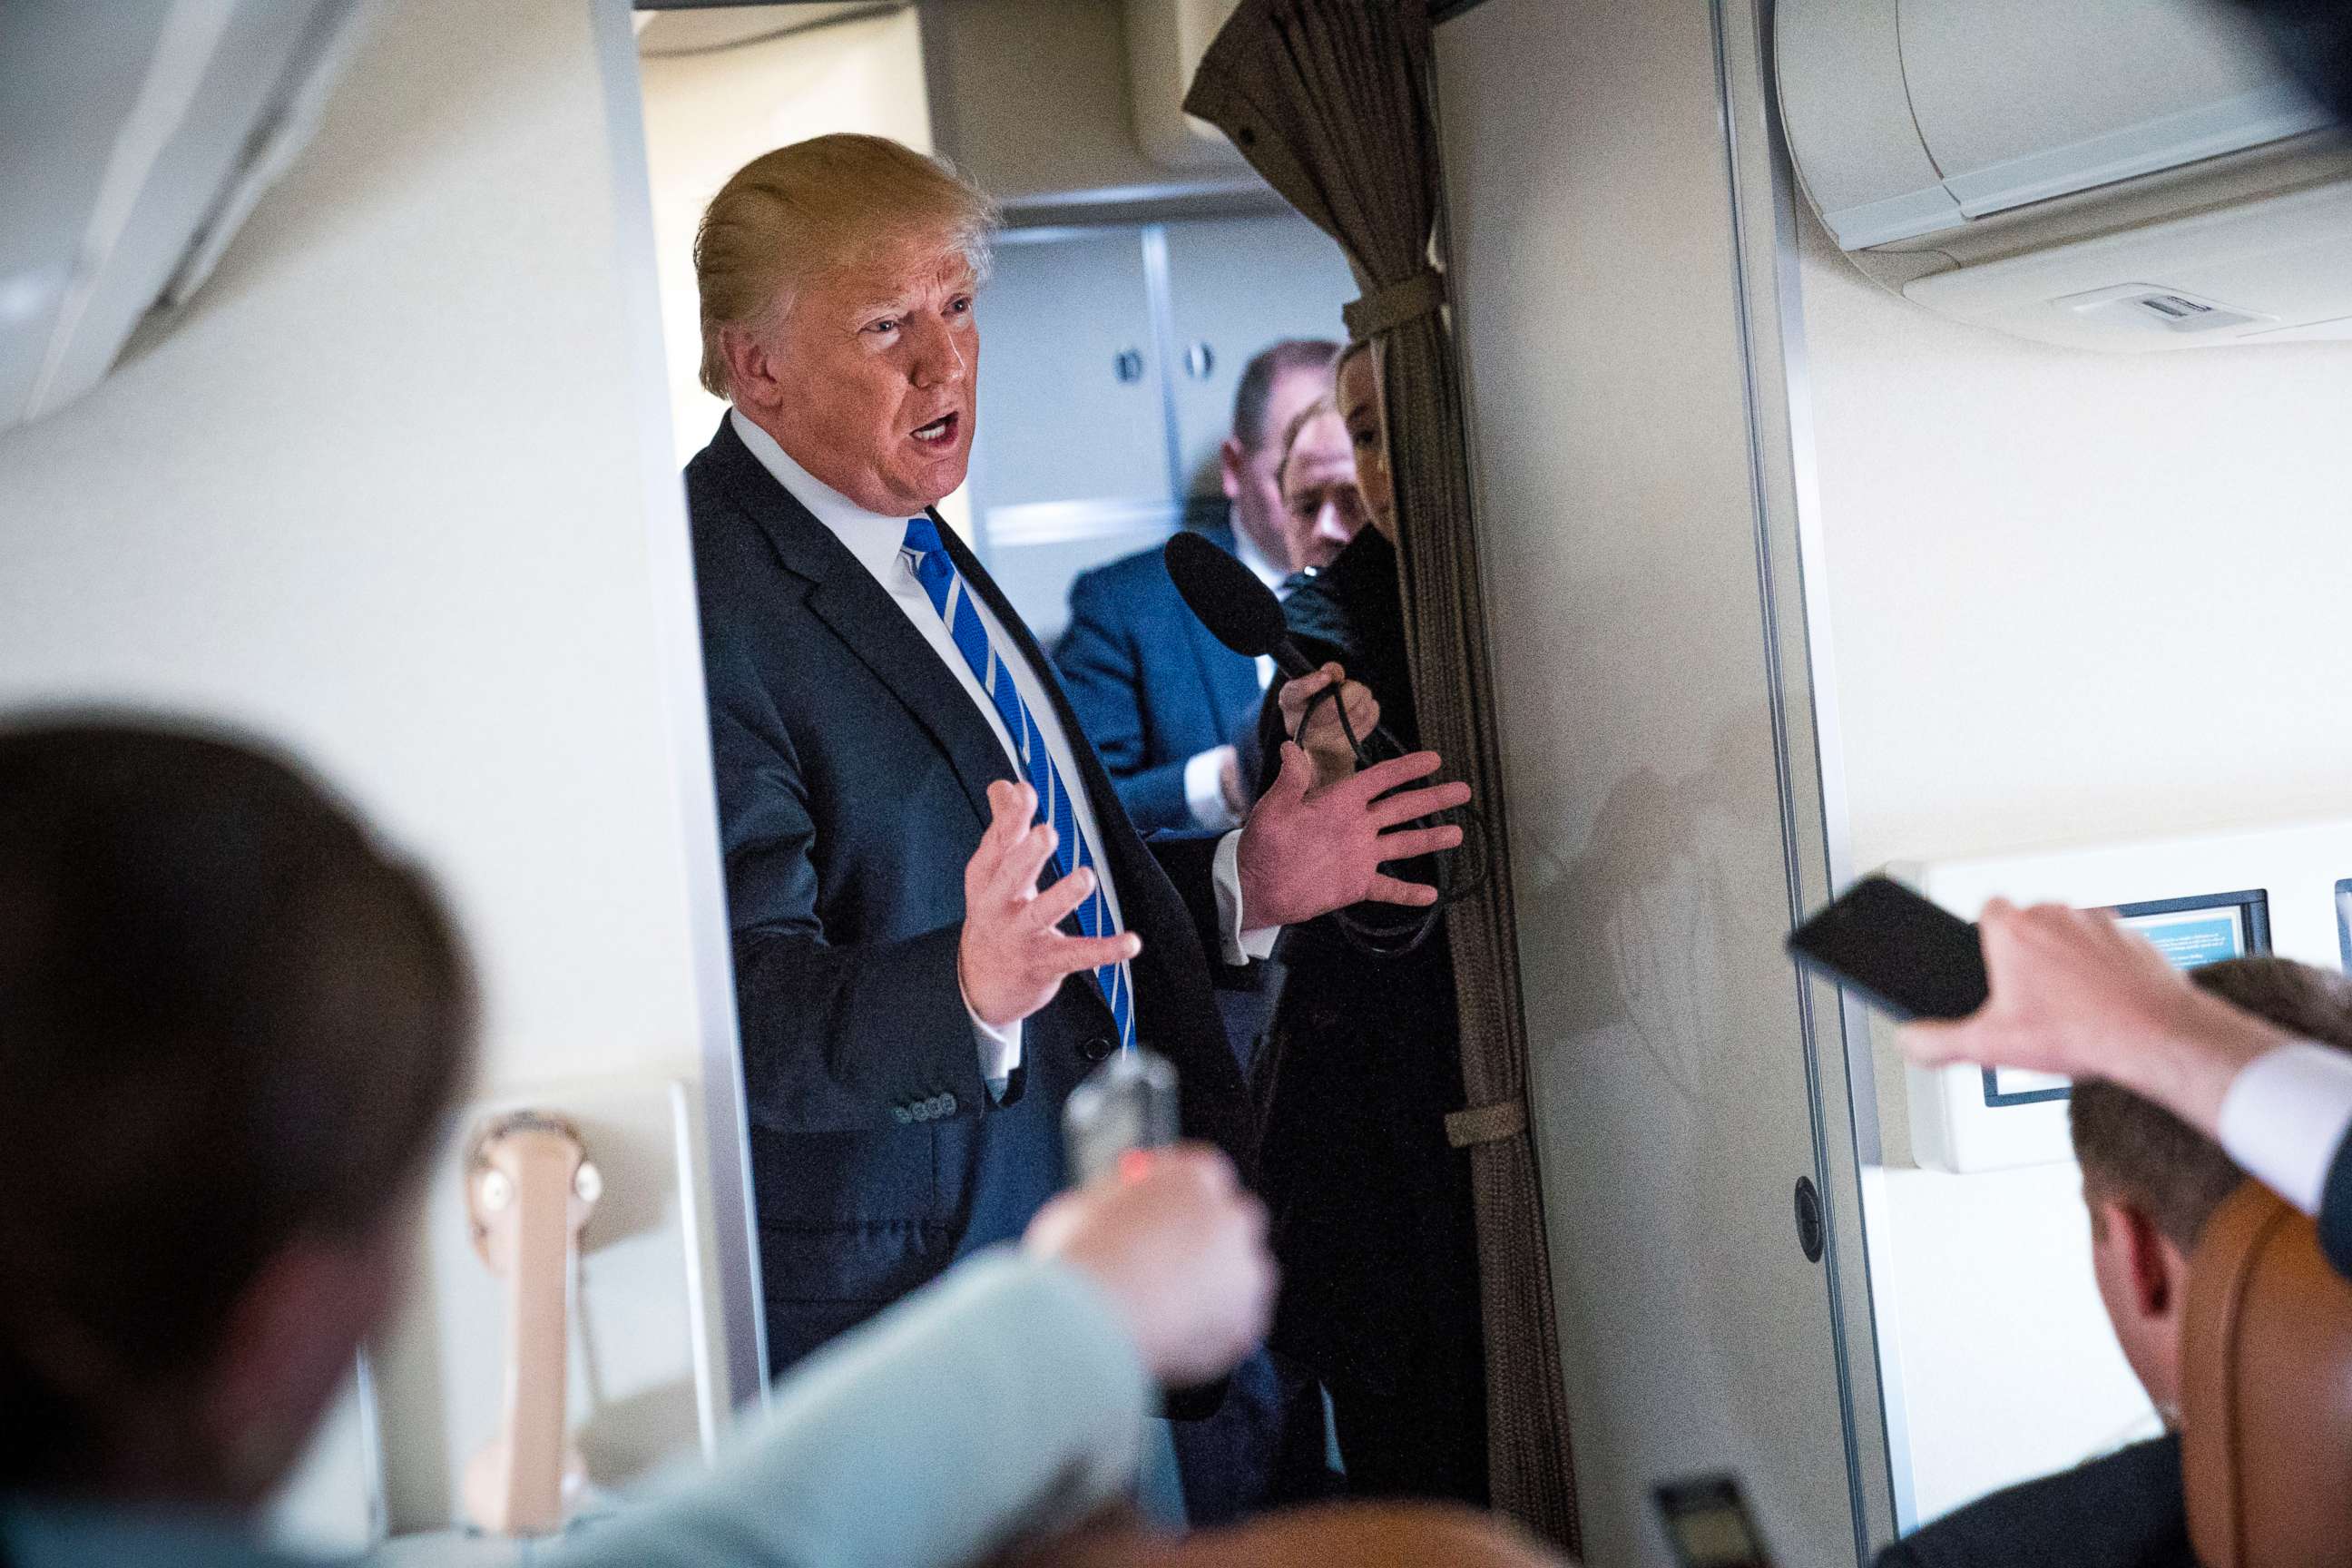 PHOTO: President Donald Trump denied knowledge about the payment by his personal lawyer Michael Cohen to porn film actress Stephanie Clifford, also known as Stormy Daniels, while speaking with reporters aboard Air Force One on April 5, 2018. 
